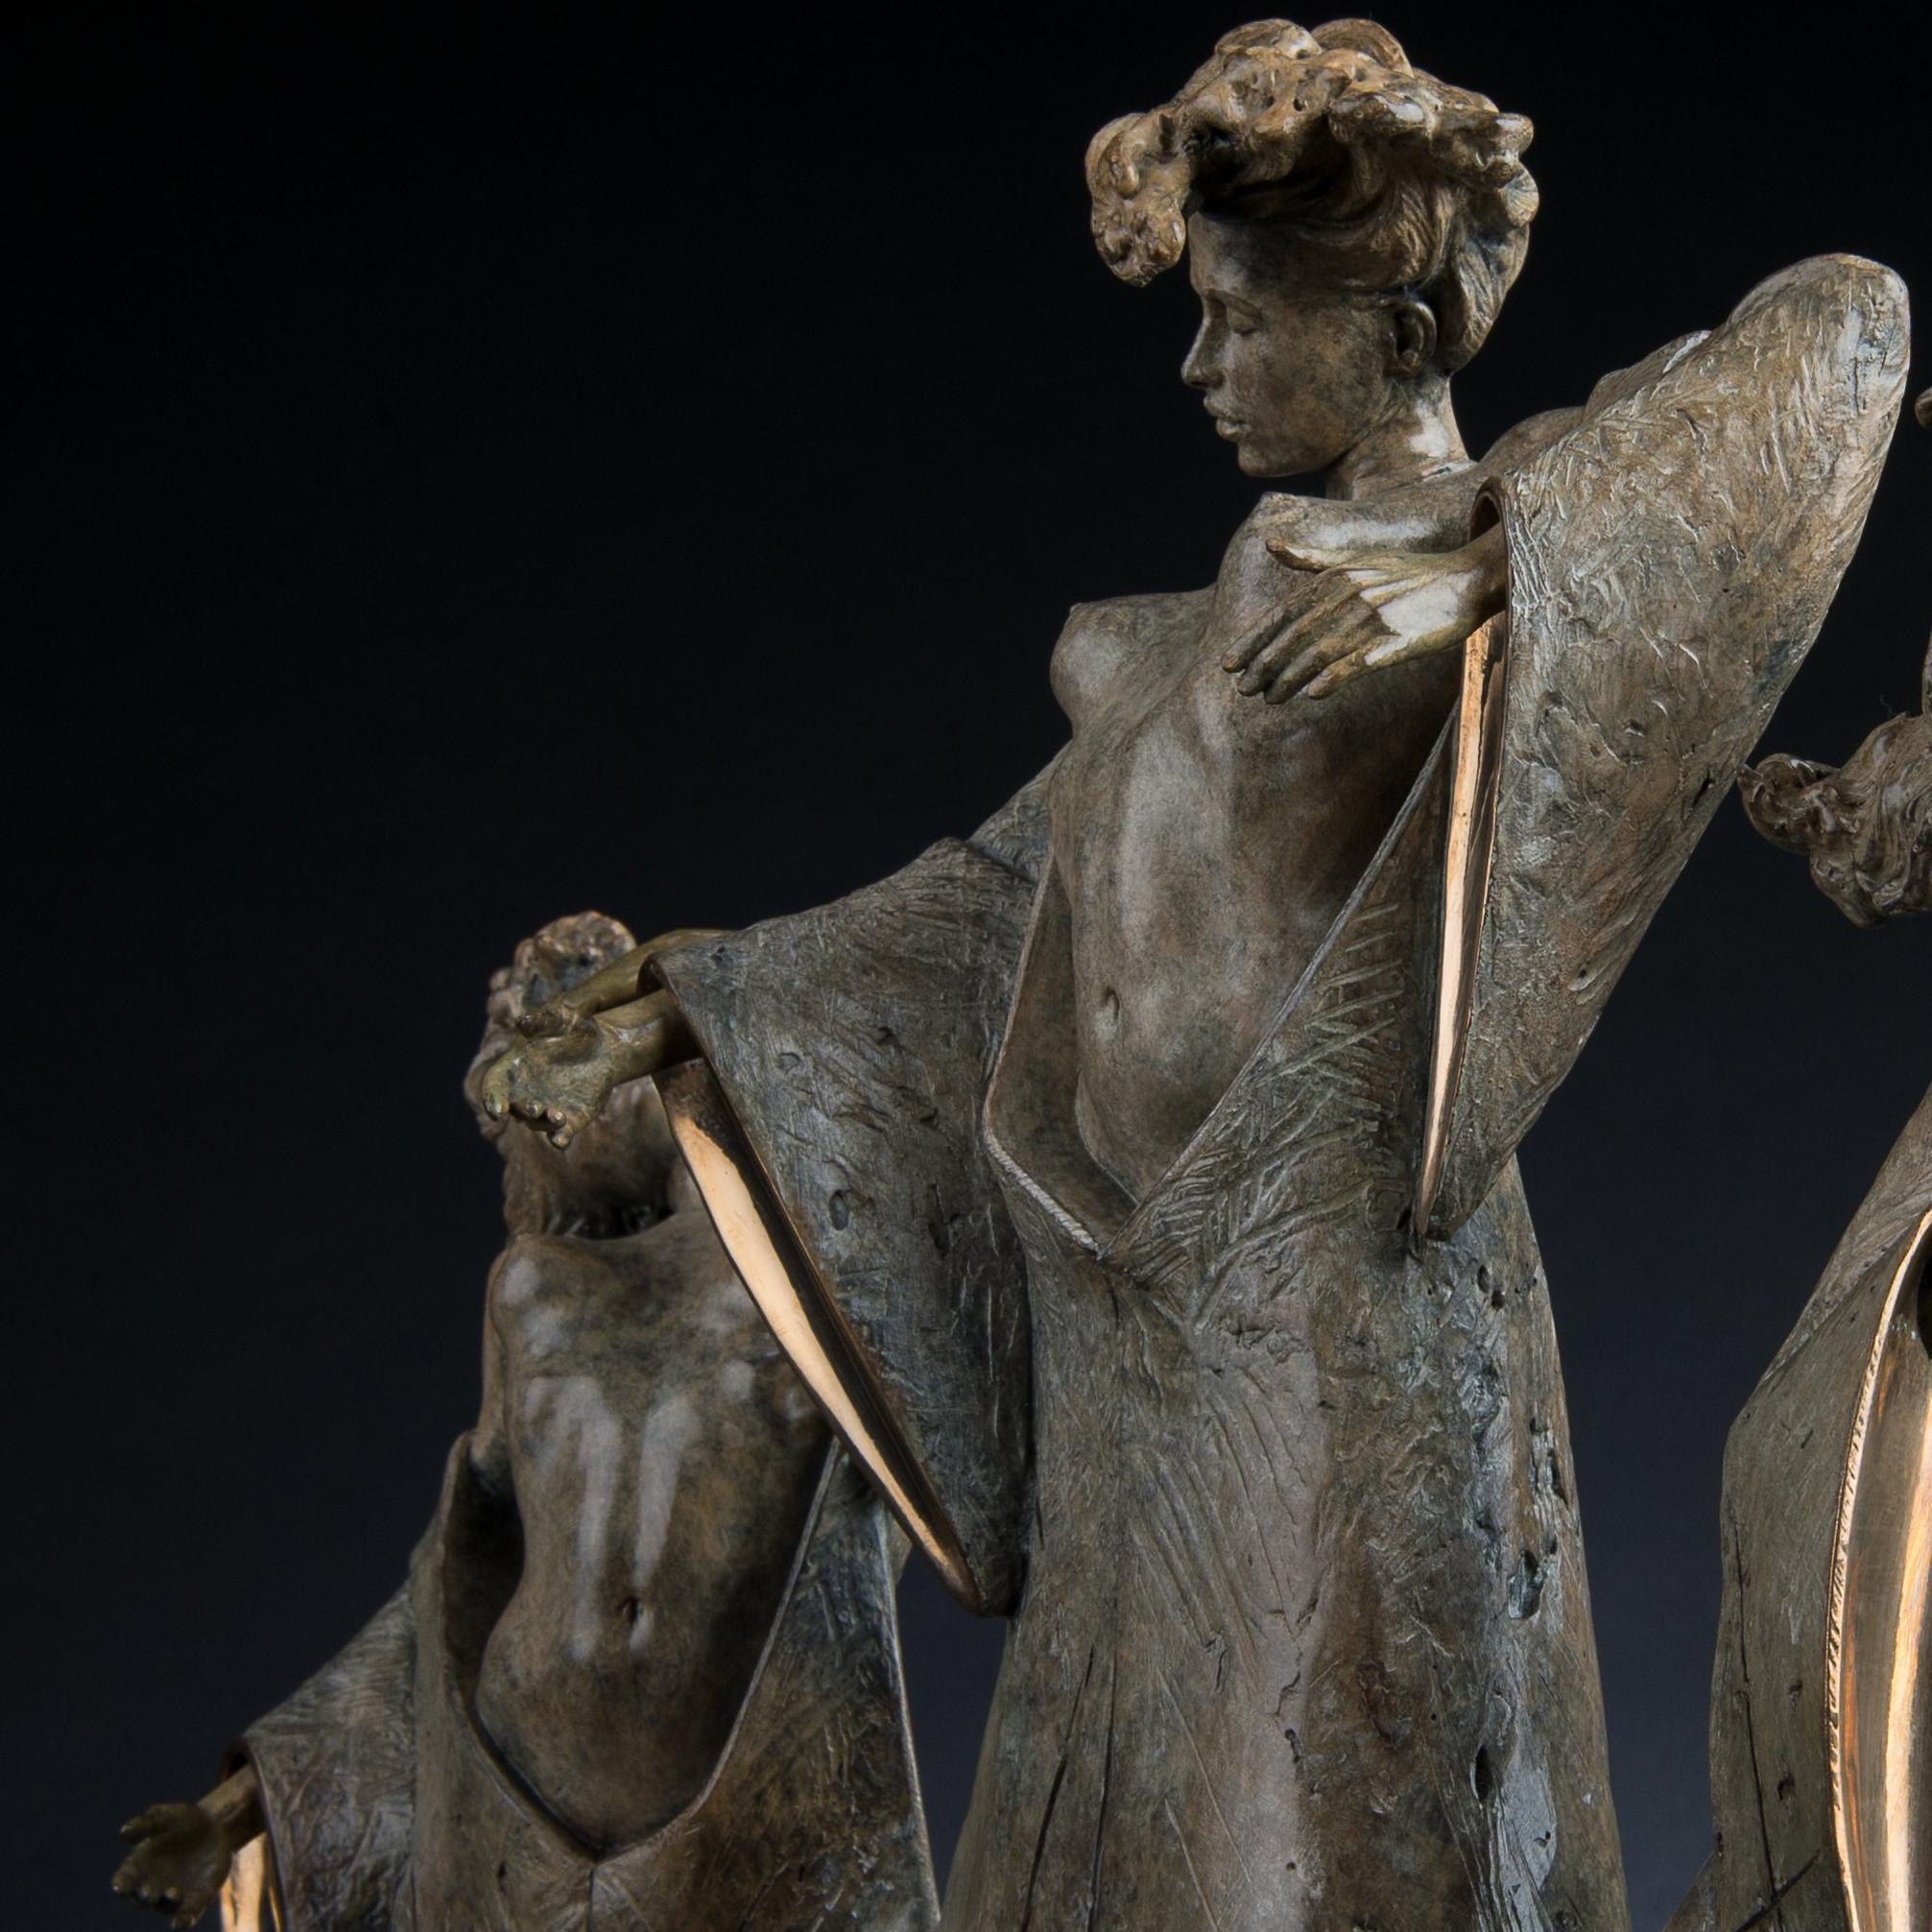 'The Three Fates' is a stunning contemporary bronze sculpture of ancient Greek myth by Carl Payne.
Continuing a successful career in England and Ireland, Carl joined Callaghan Fine Paintings and Works of Art at the beginning of 2004 in order to